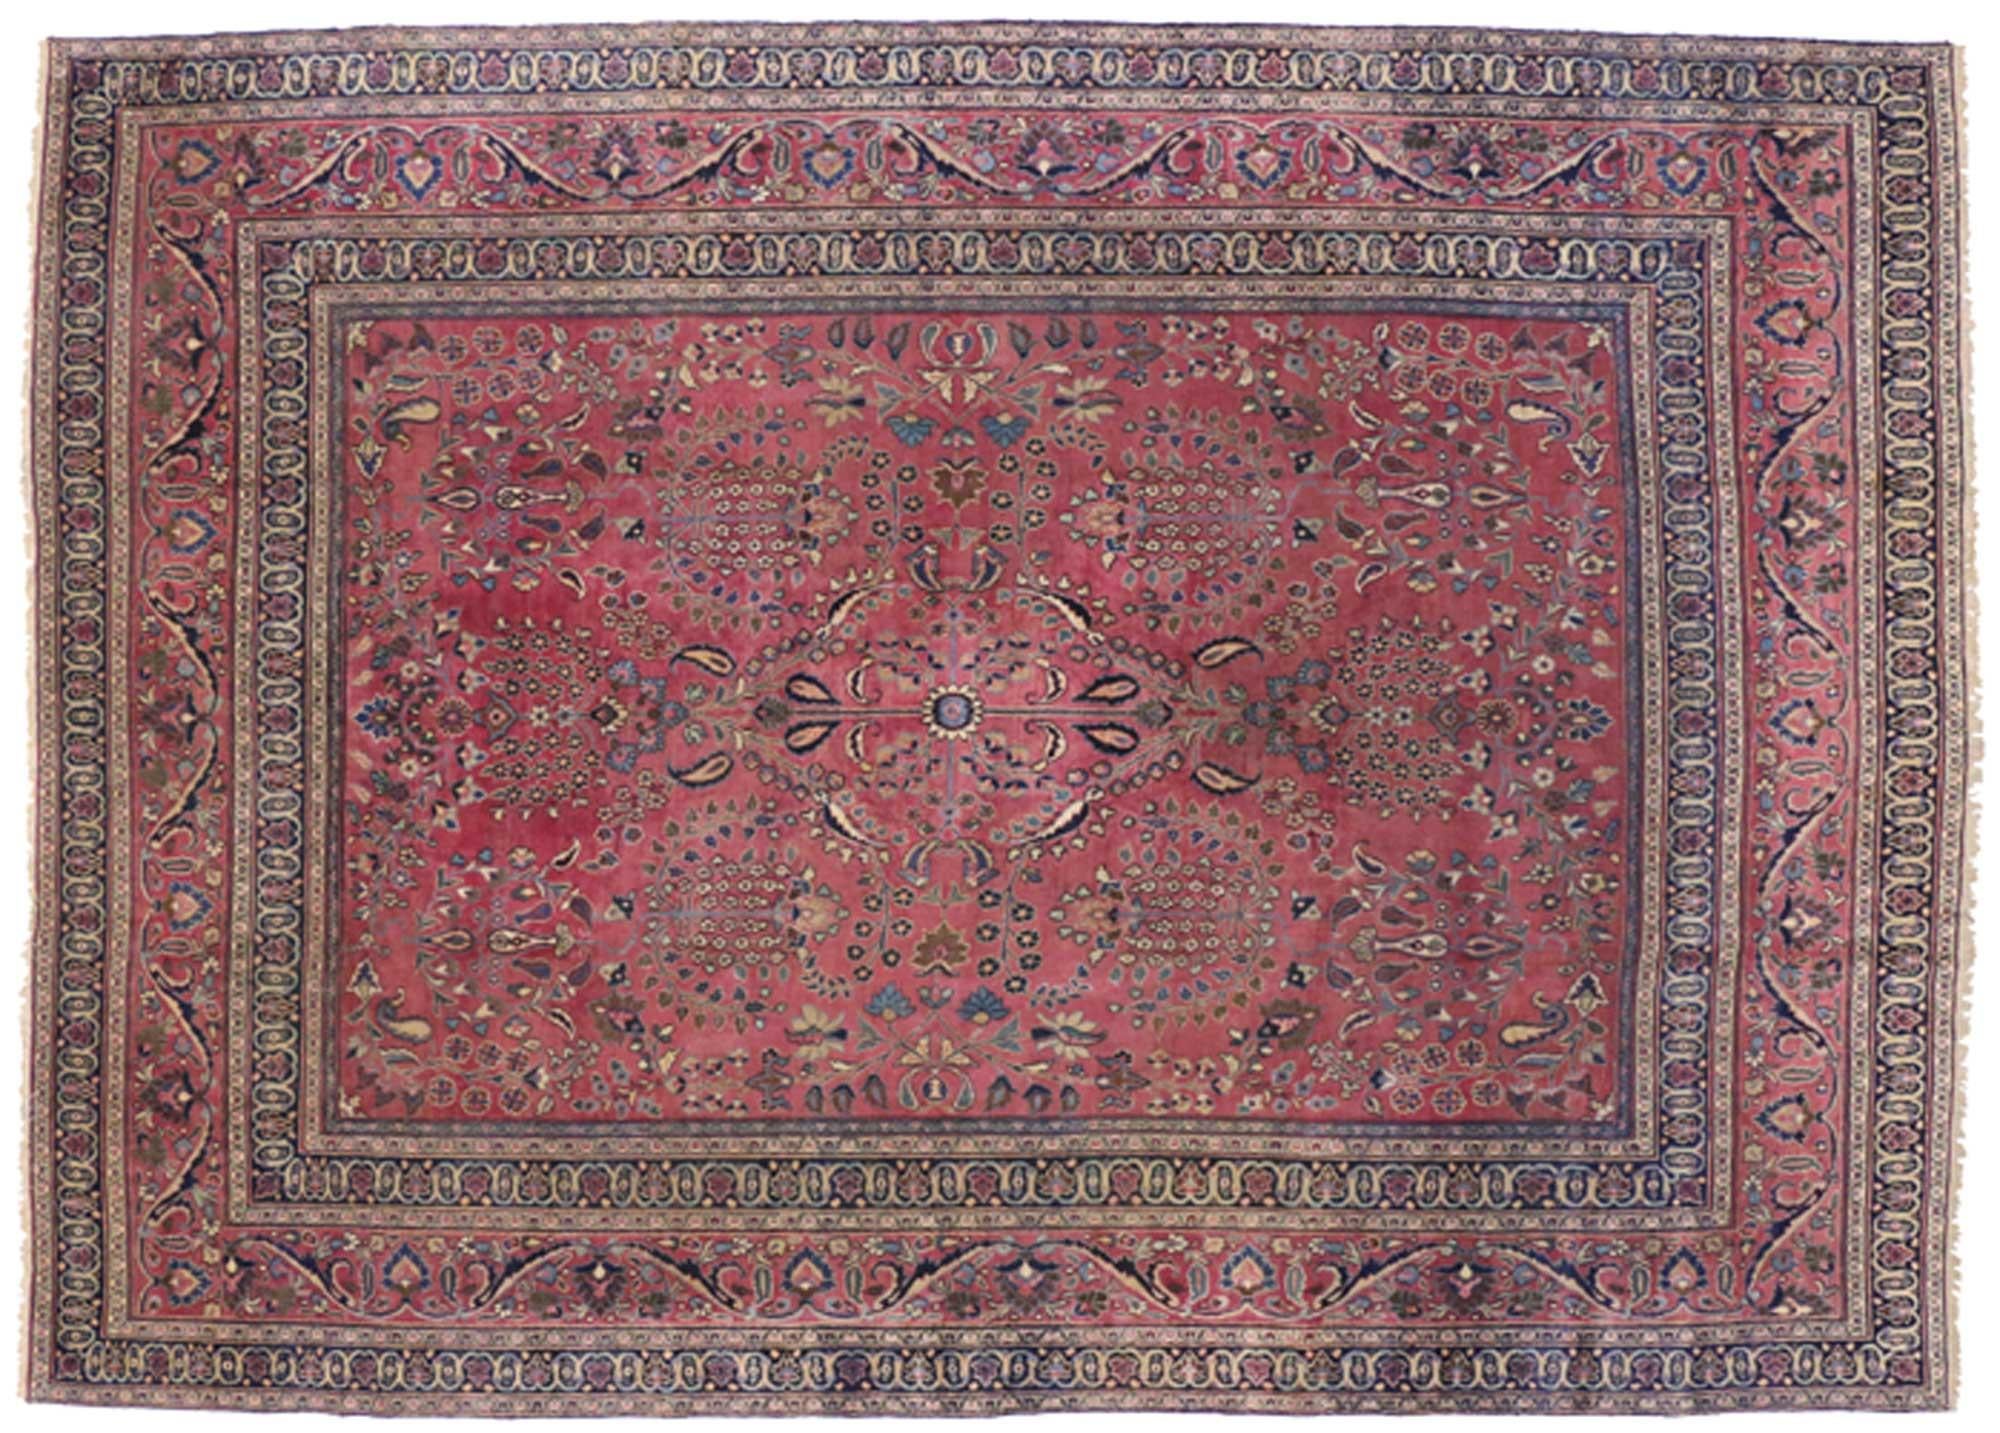 71924 Antique Persian Khorassan Palace Rug with Modern Victorian Style and Old World Vibes 11'03 x 16'00. Rich in color, texture and beguiling ambiance, this hand-knotted wool antique Persian Khorassan palace rug beautifully displays timeless